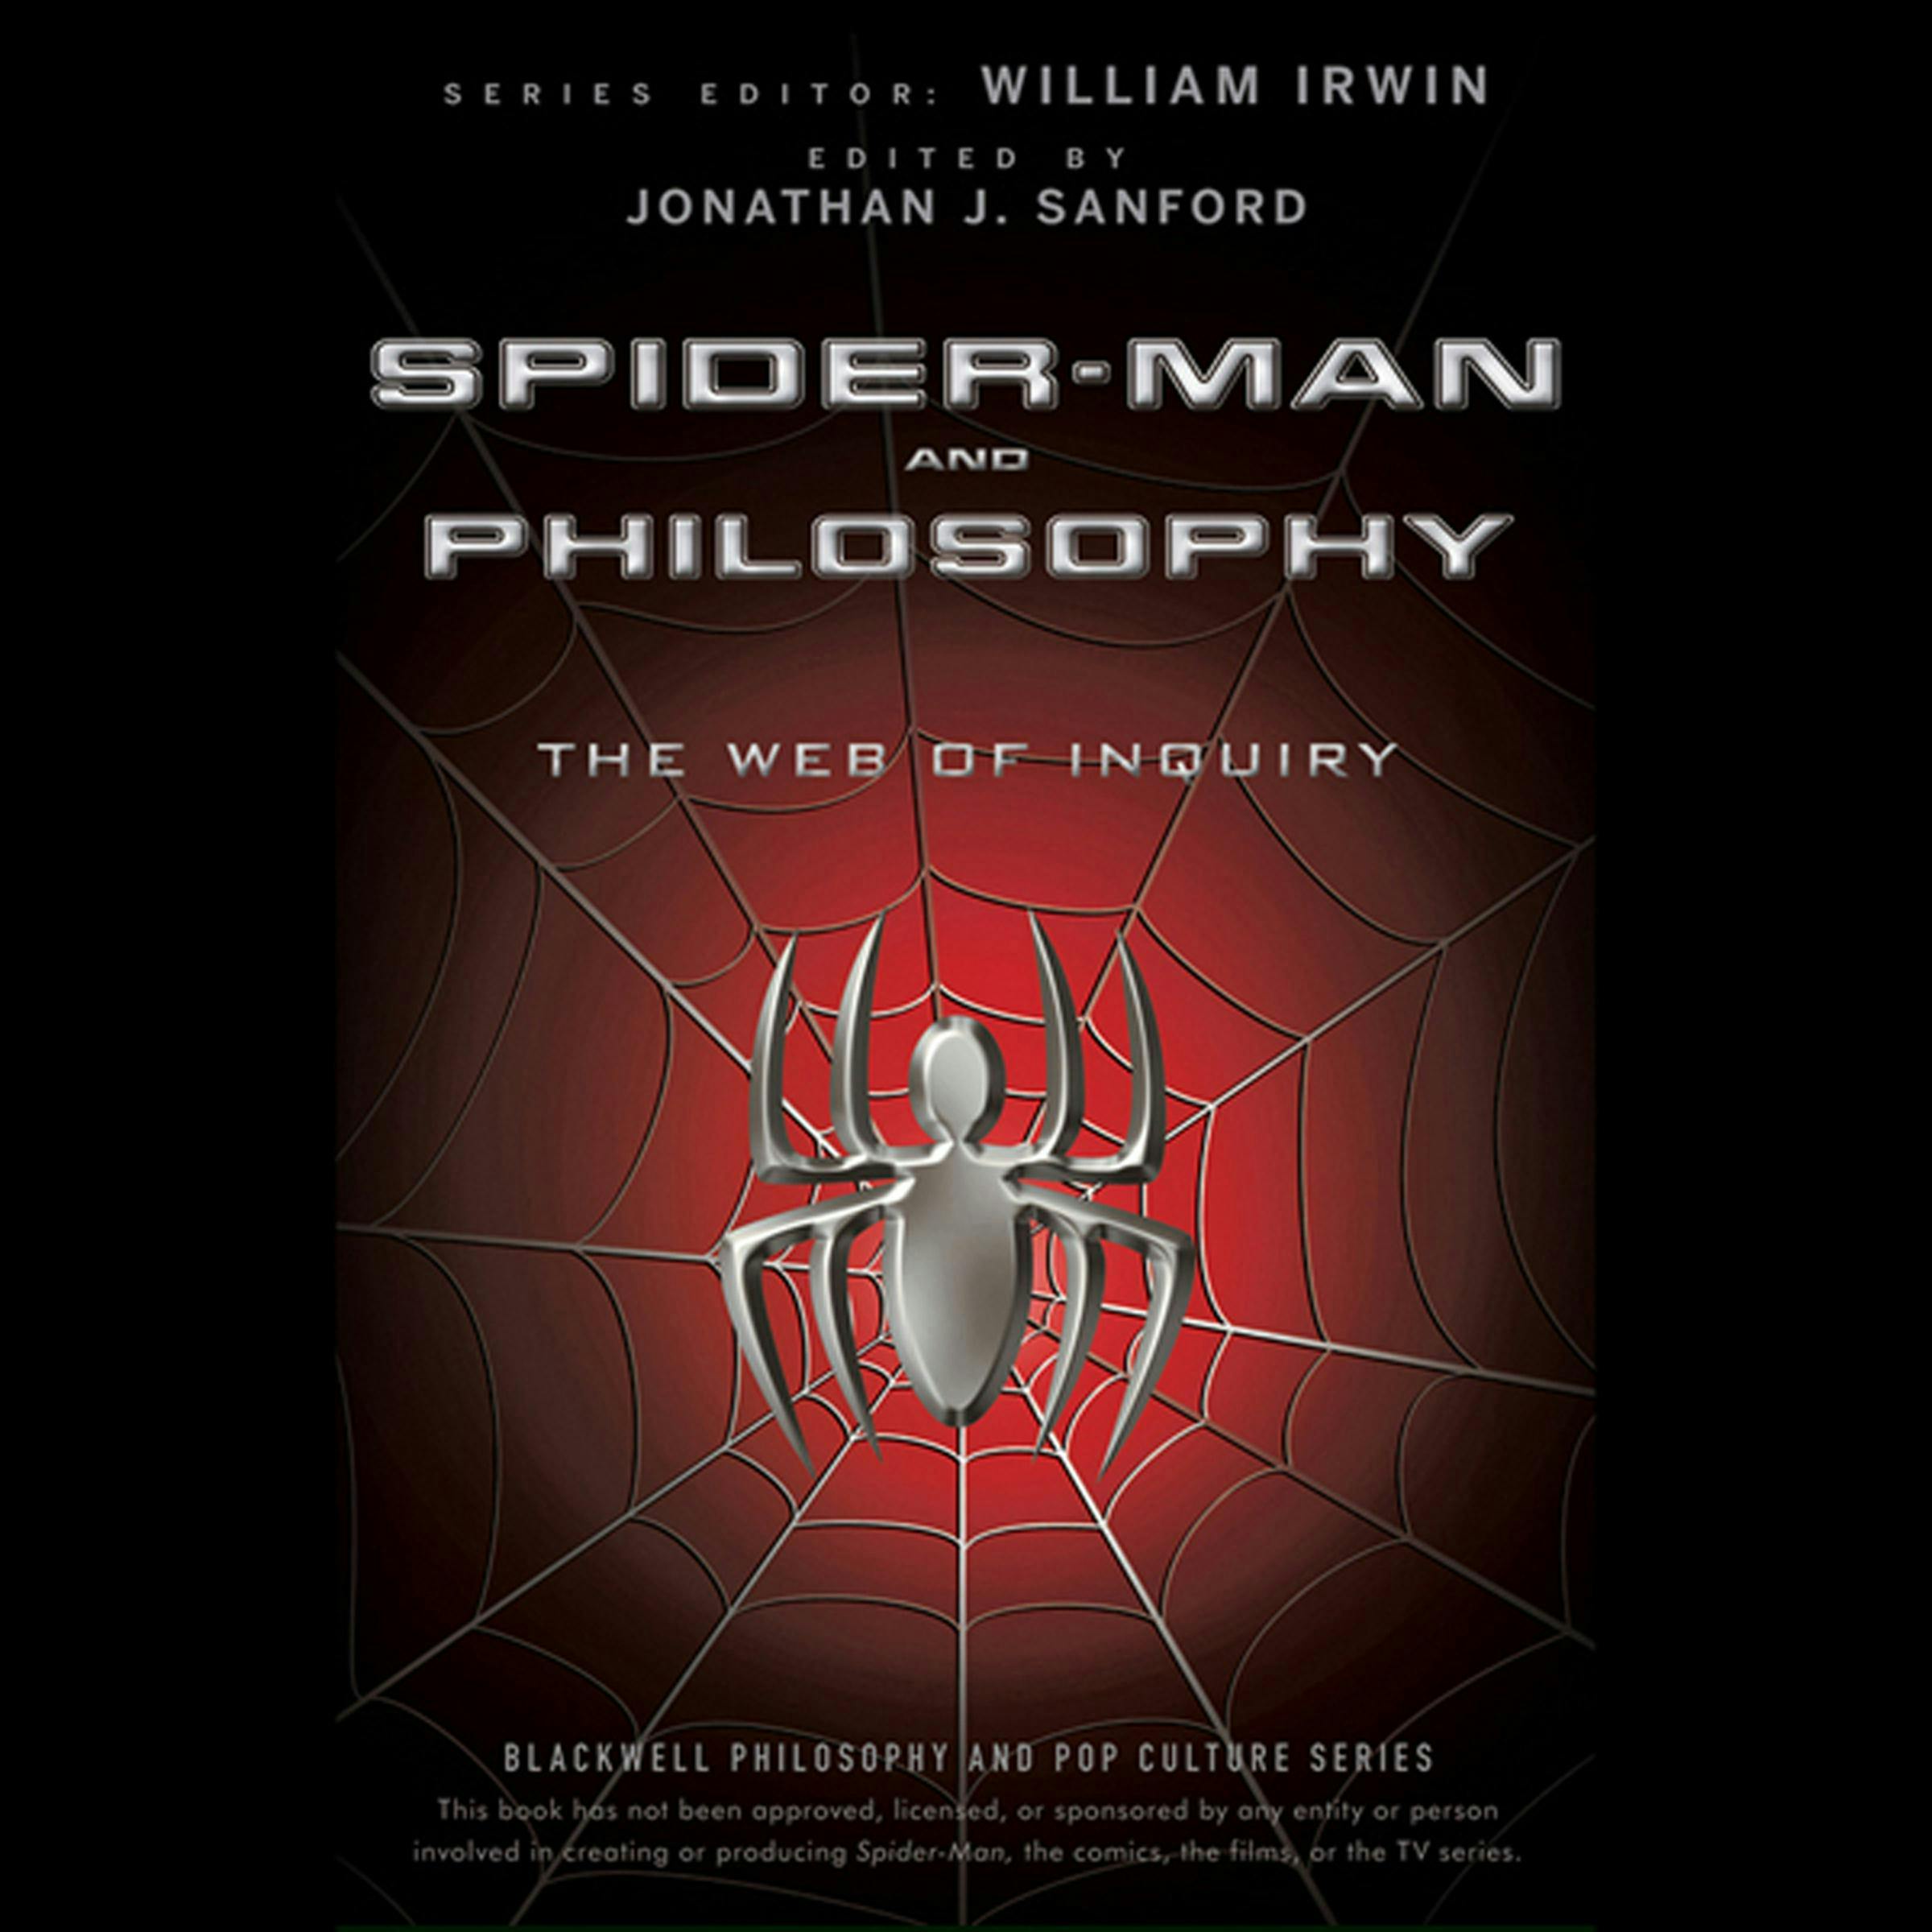 Spider-Man and Philosophy: The Web of Inquiry - Jonathan J. Sanford, William Irwin